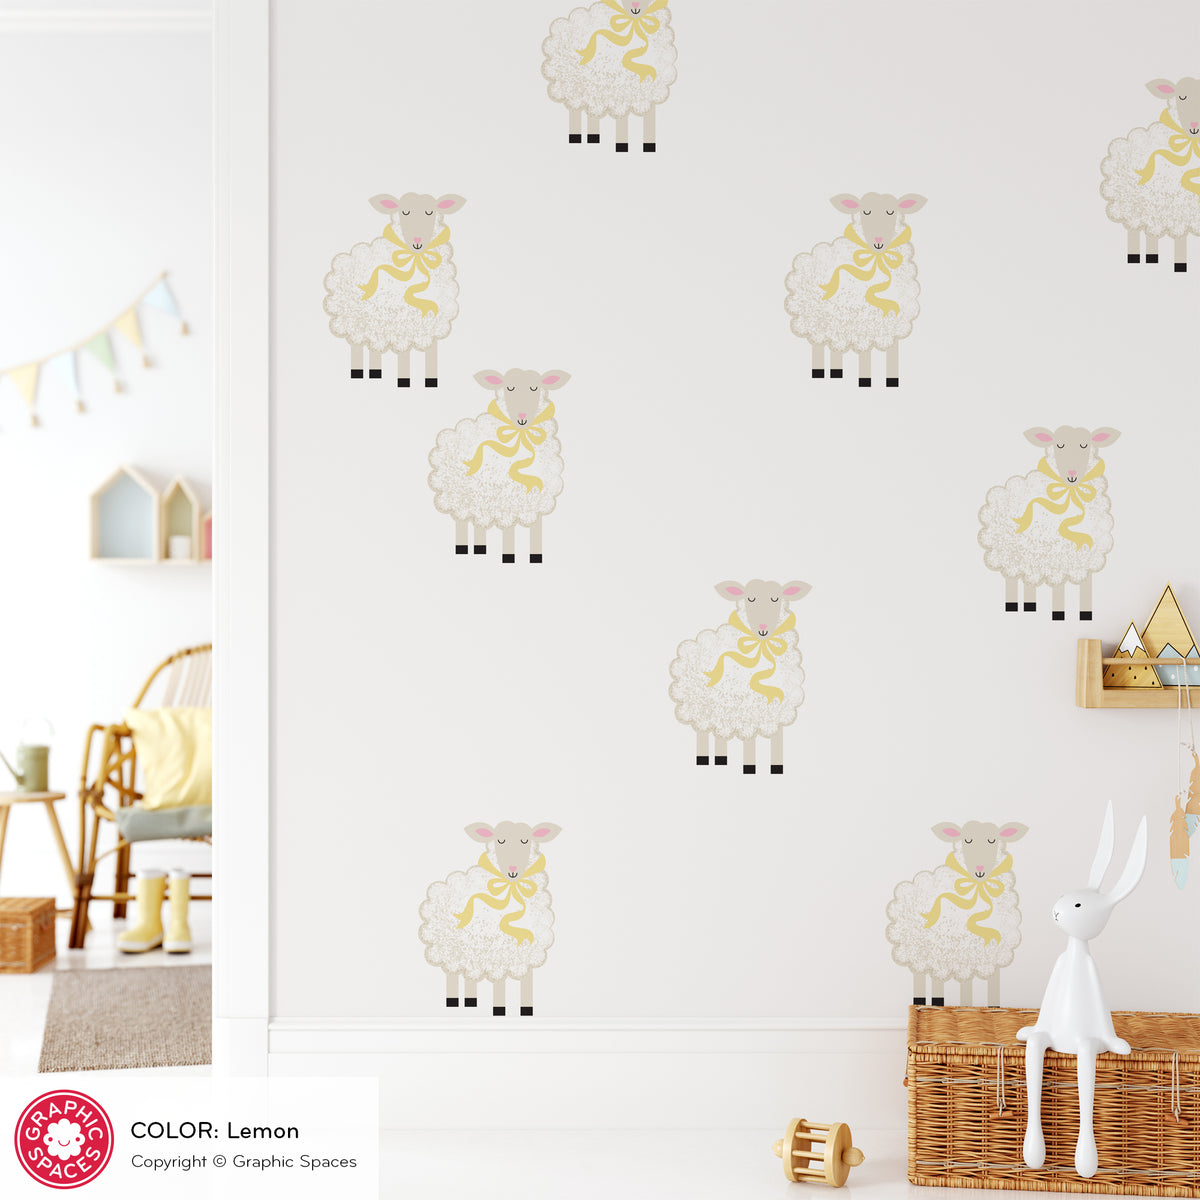 Sheep Scatter Fabric Wall Decals - Pack of 15